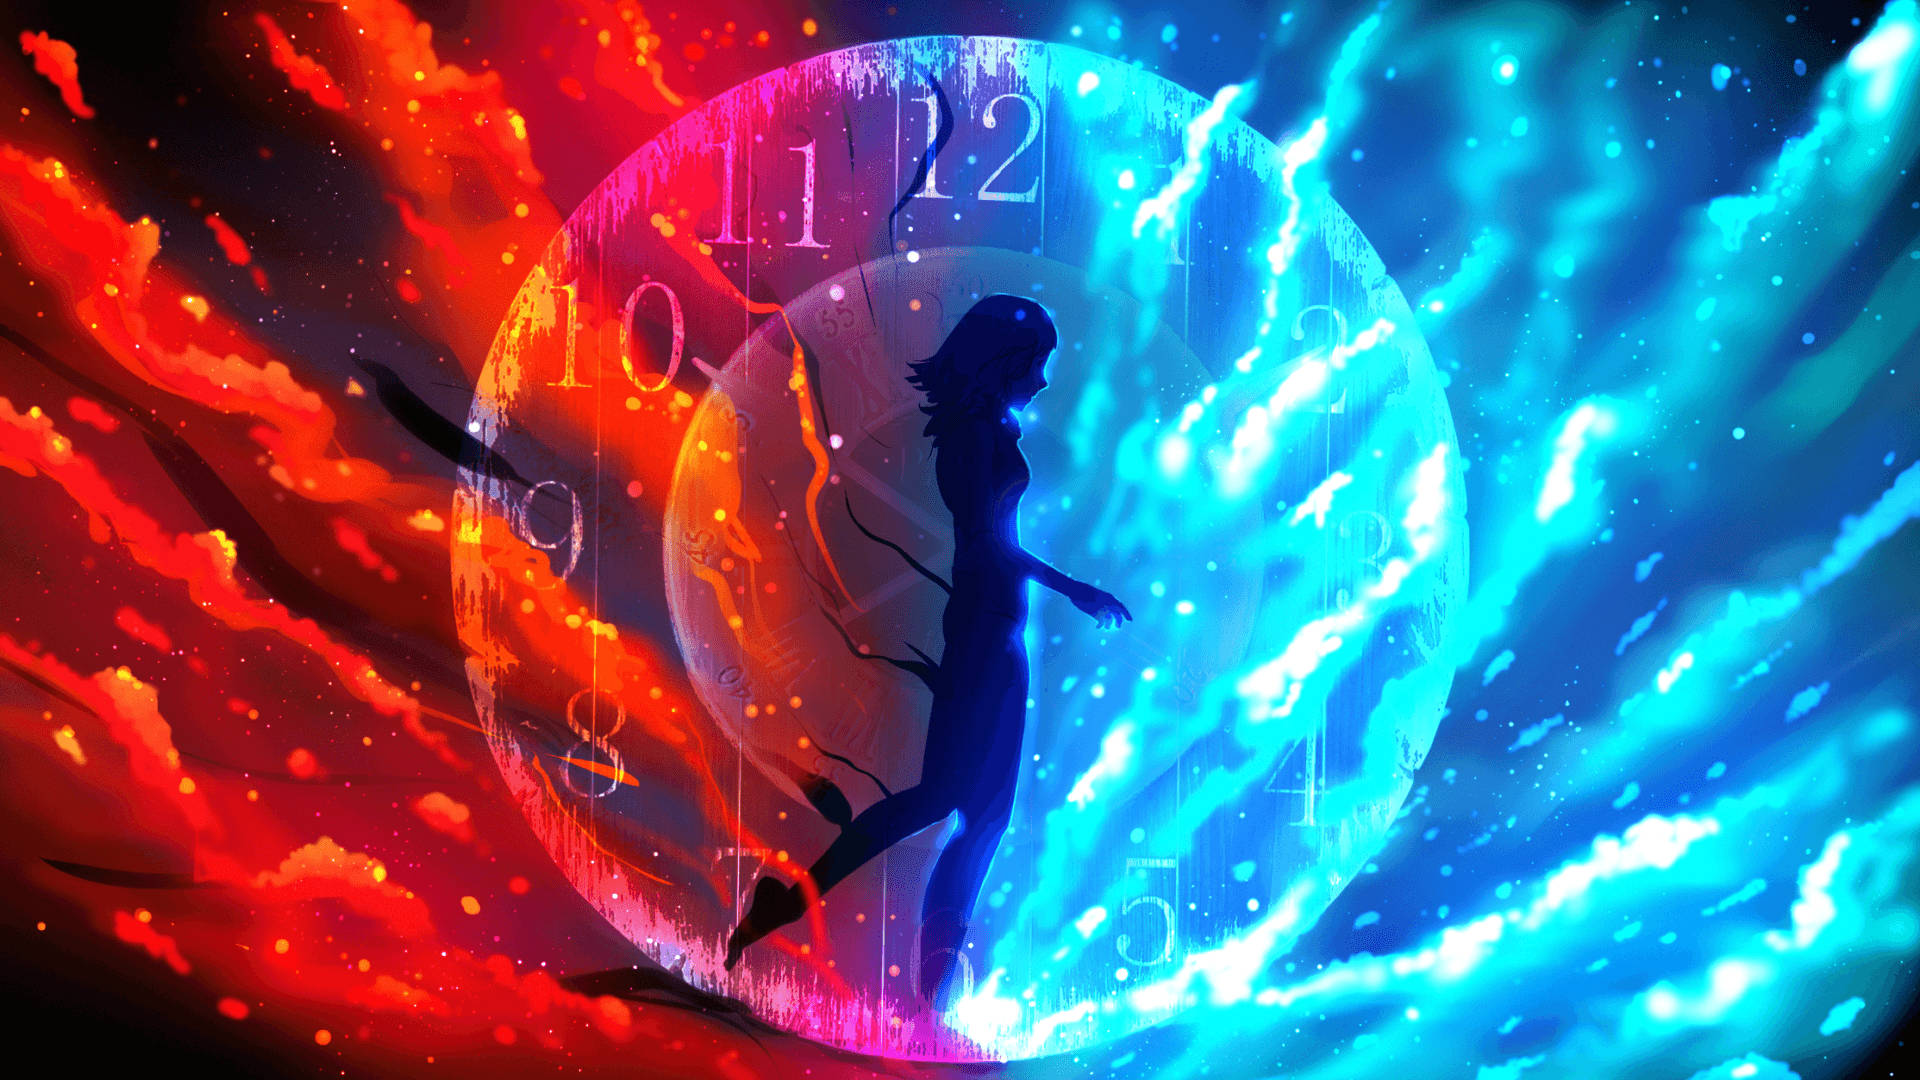 Red And Blue Fire Anime Clock Wallpaper